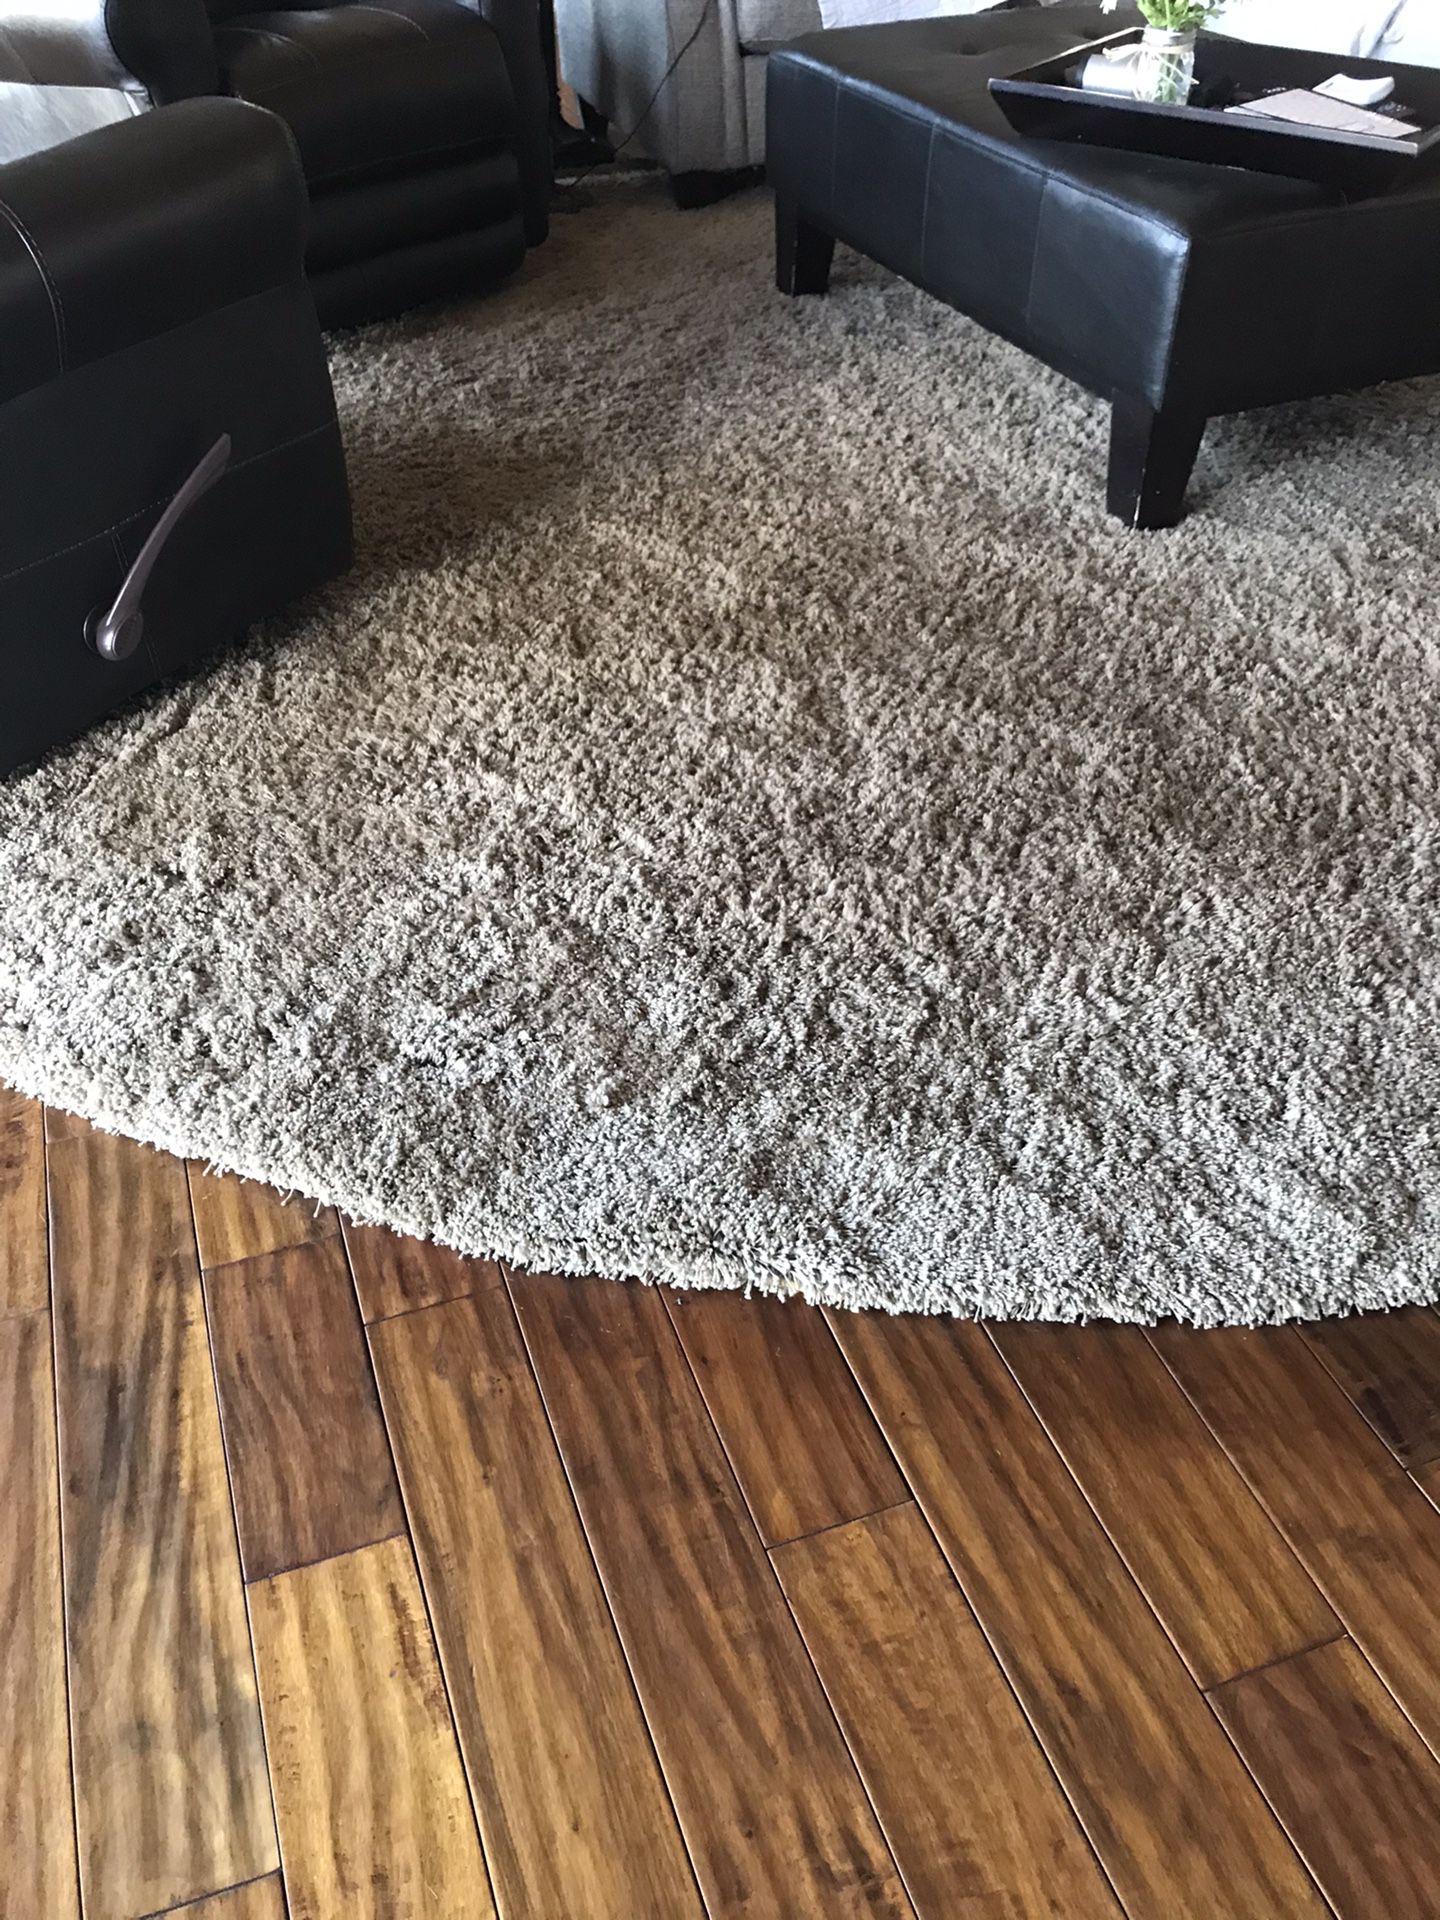 2Rugs for sale $65